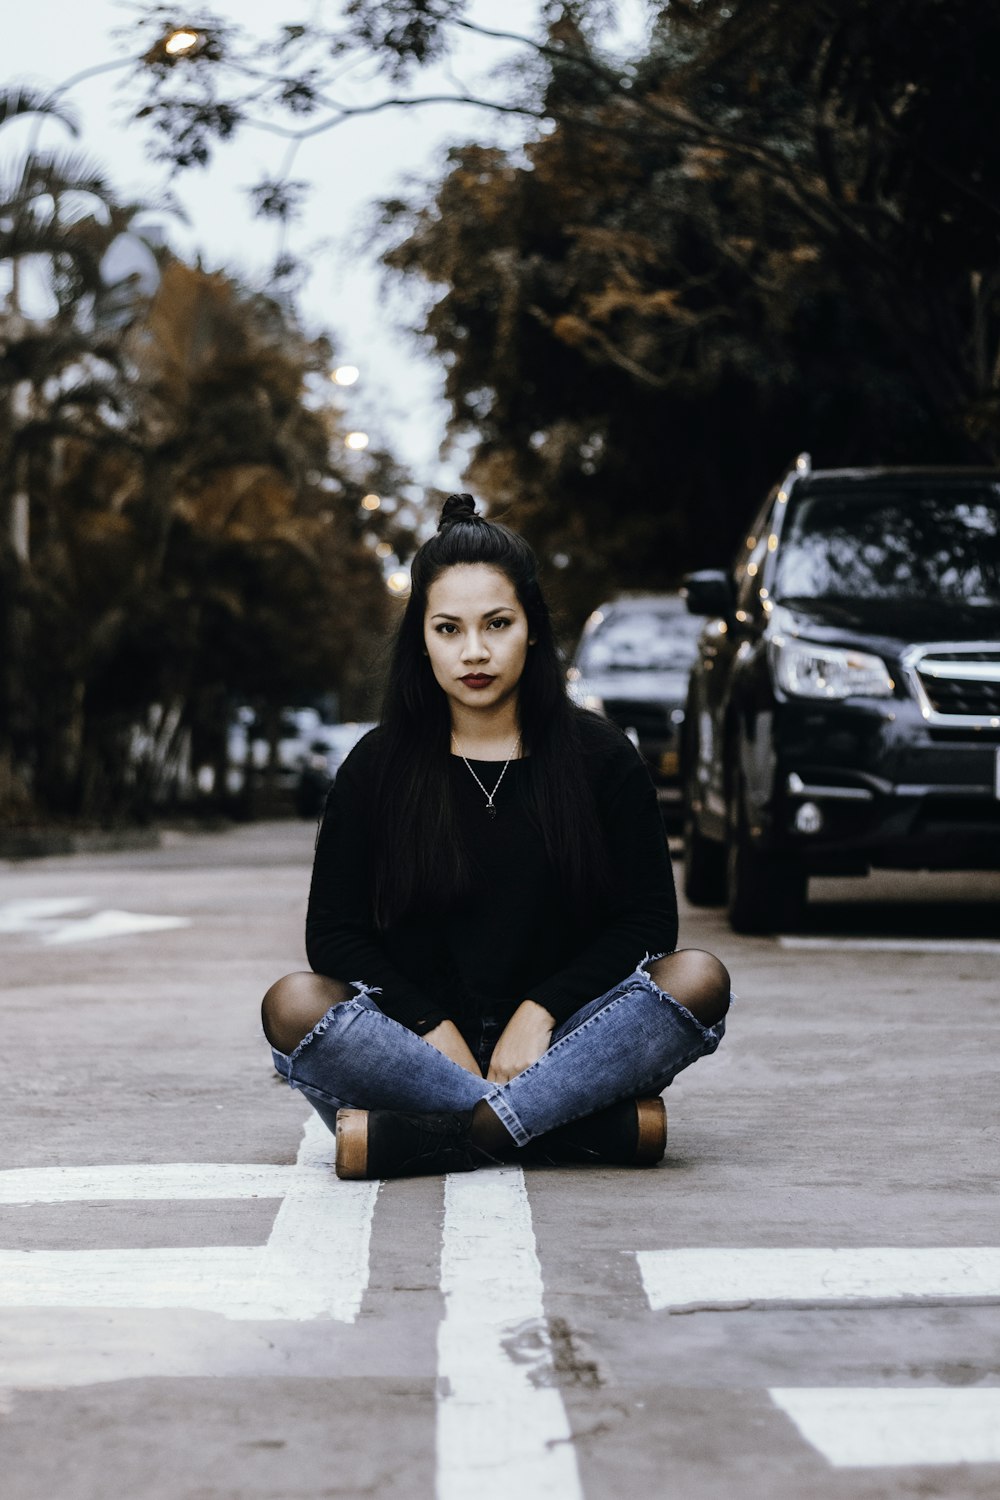 focus photography of woman sitting on gray concrete road during daytime